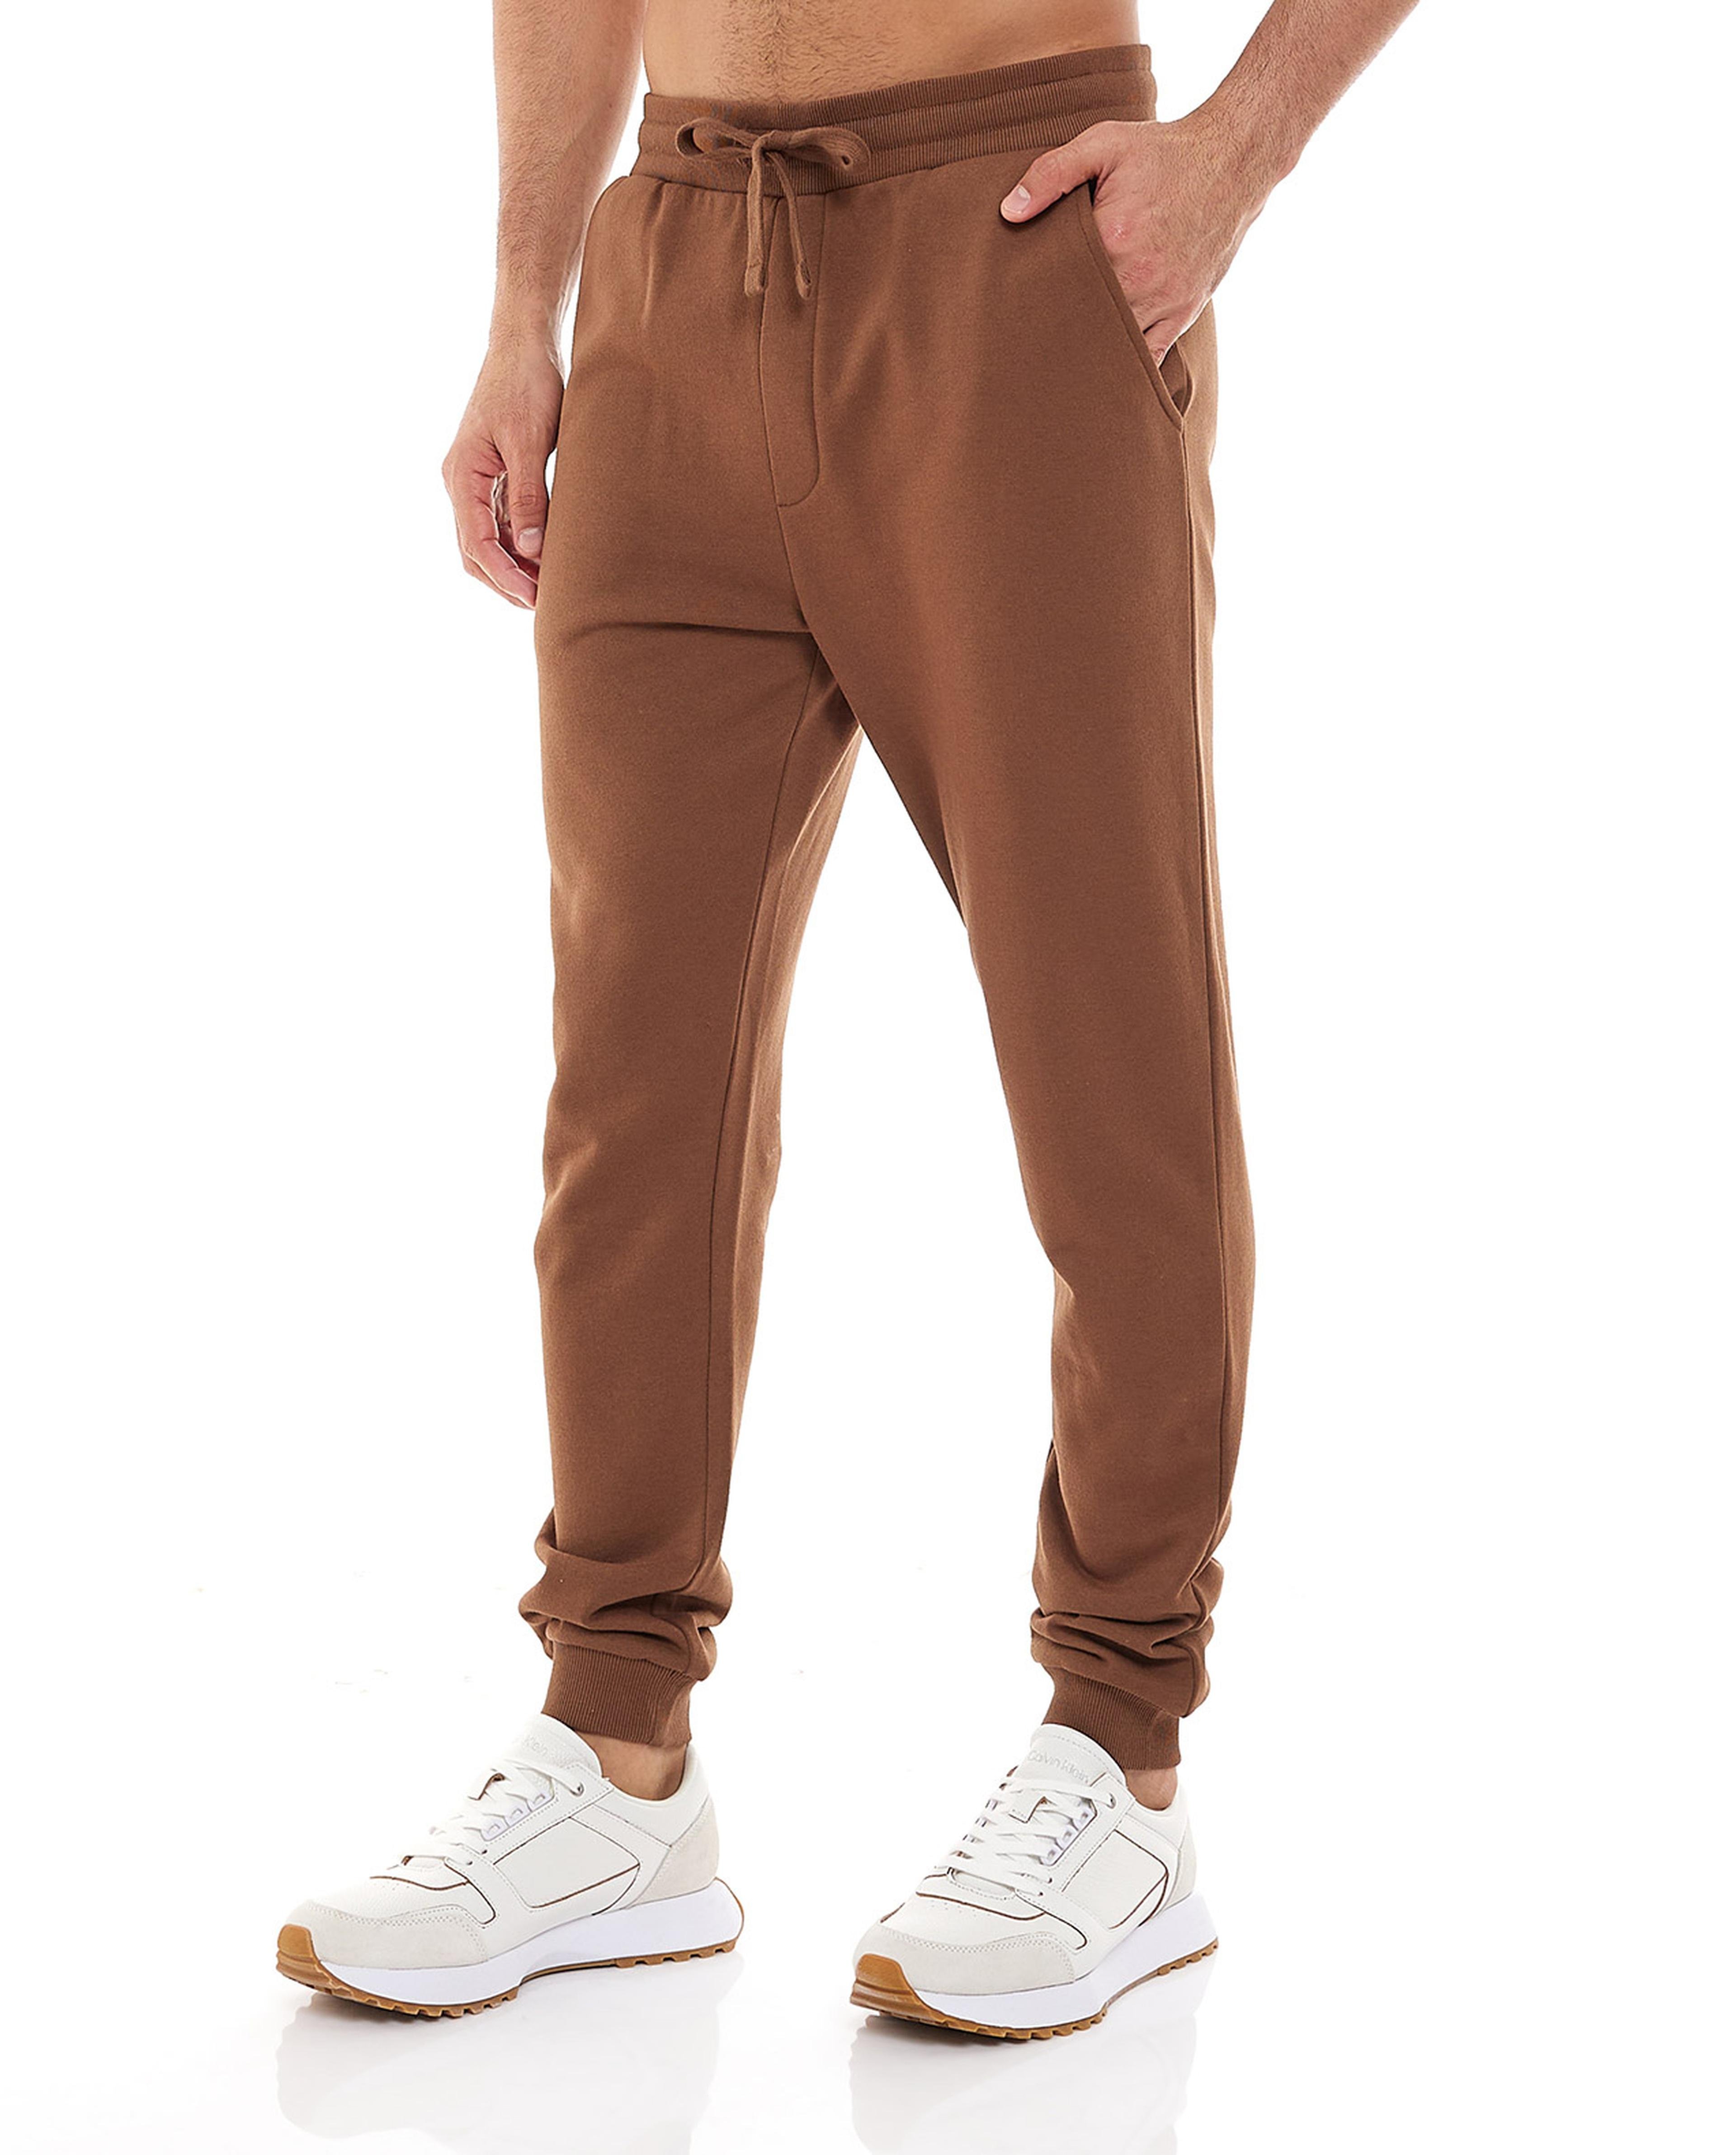 Solid Knit Joggers with Drawstring Waist